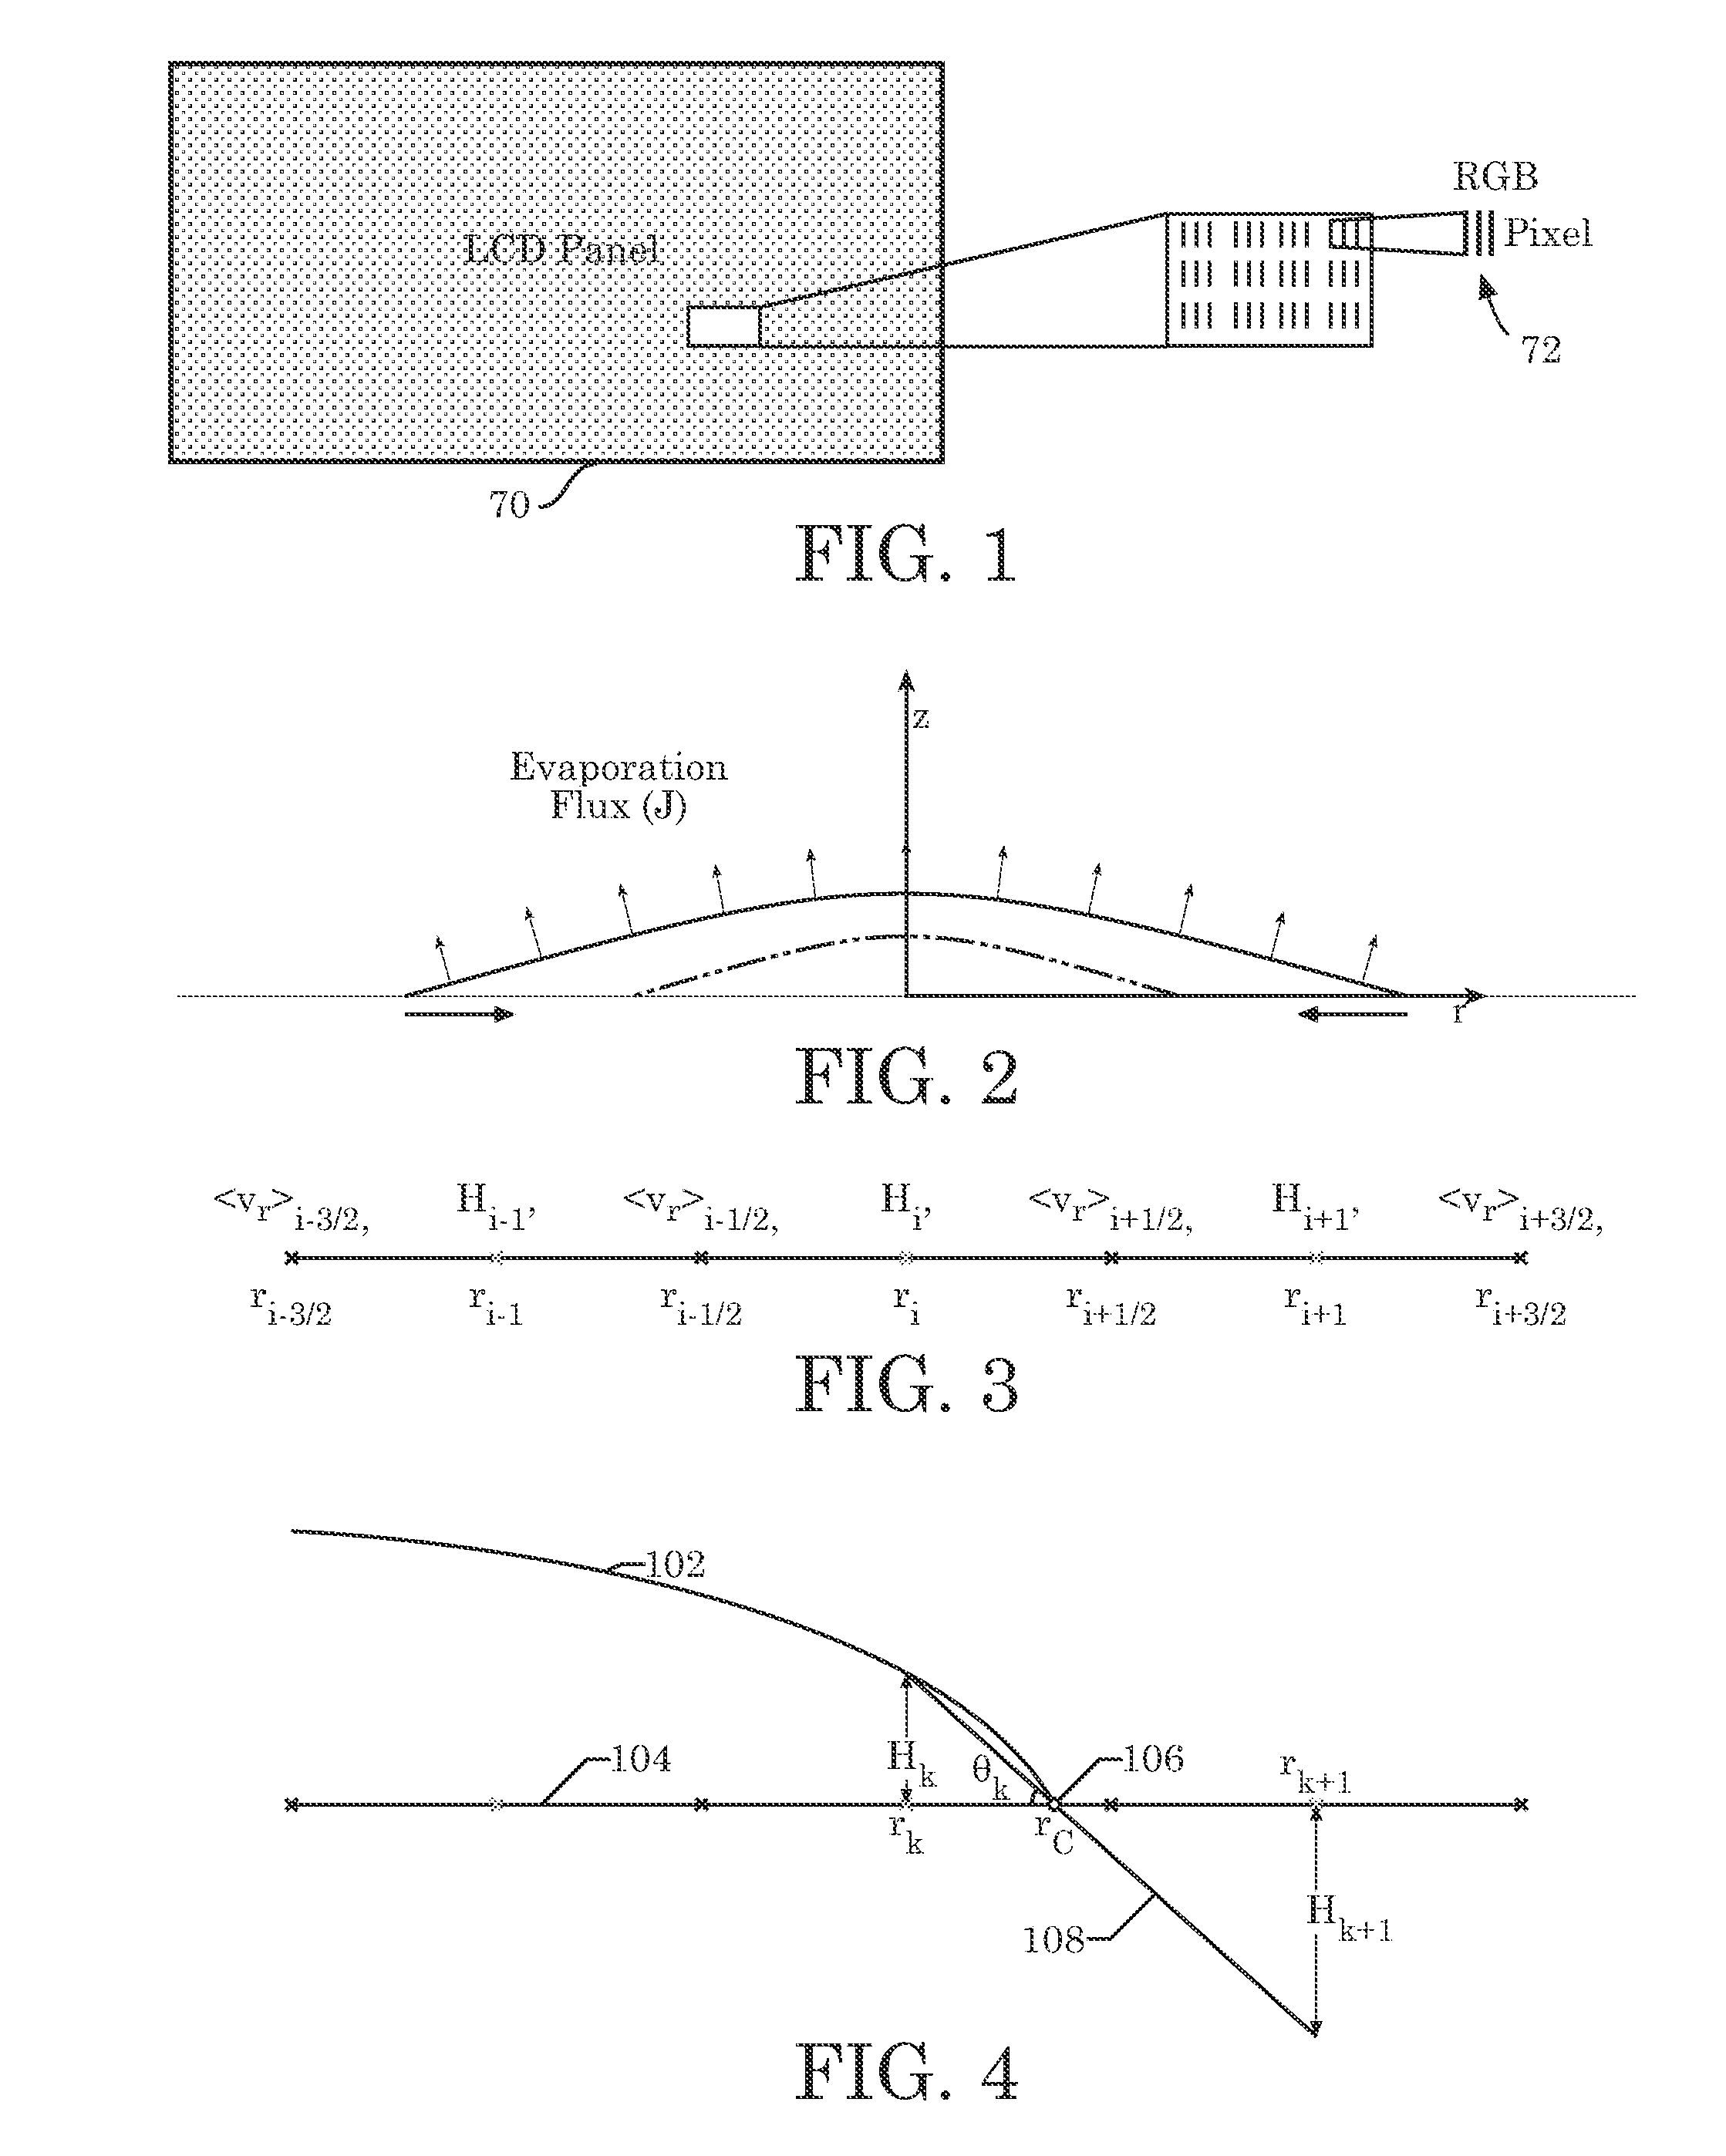 Finite Difference Algorithm for Solving Slender Droplet Evaporation with Moving Contact Lines